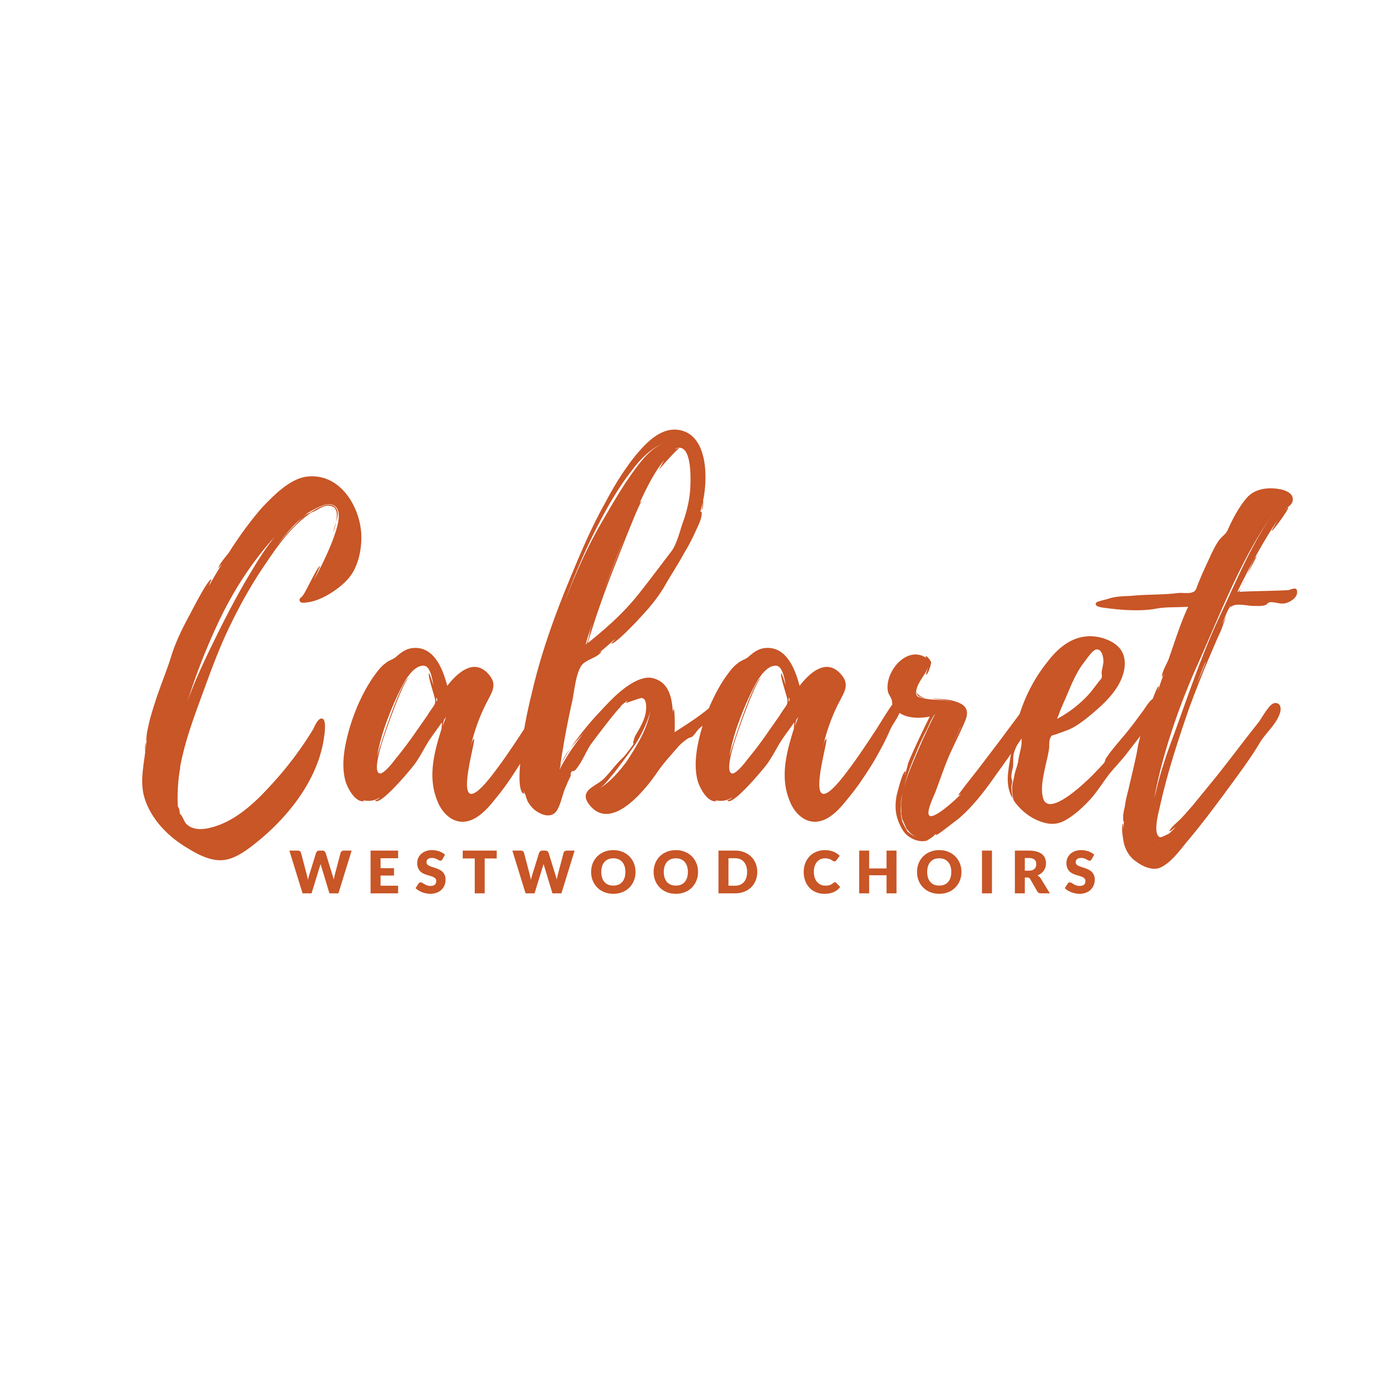 From The Cabaret Committee Westwood Hs Choirs